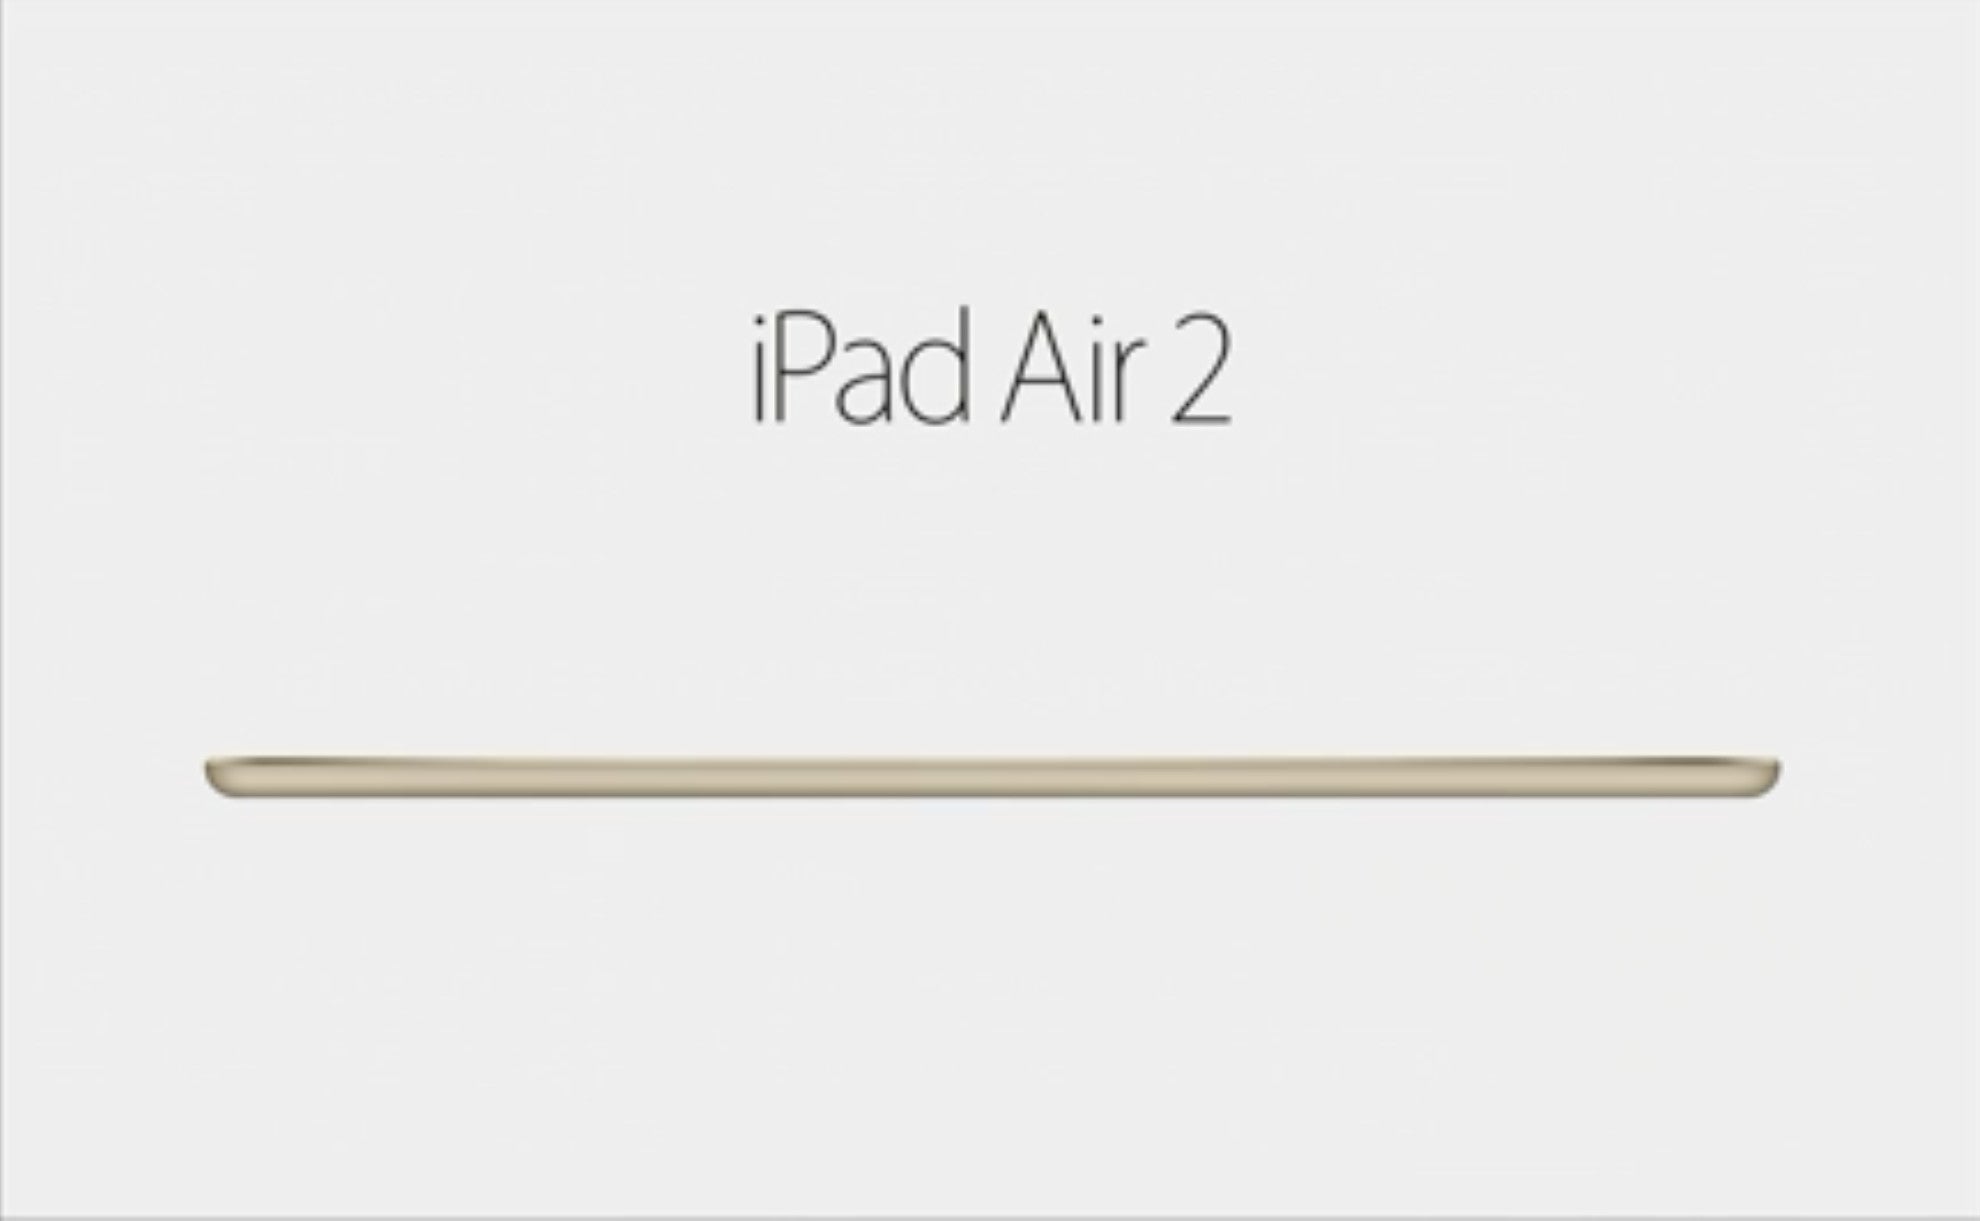 At the amazing 6.1 mm, the iPad Air 2 is the thinnest tablet on the planet